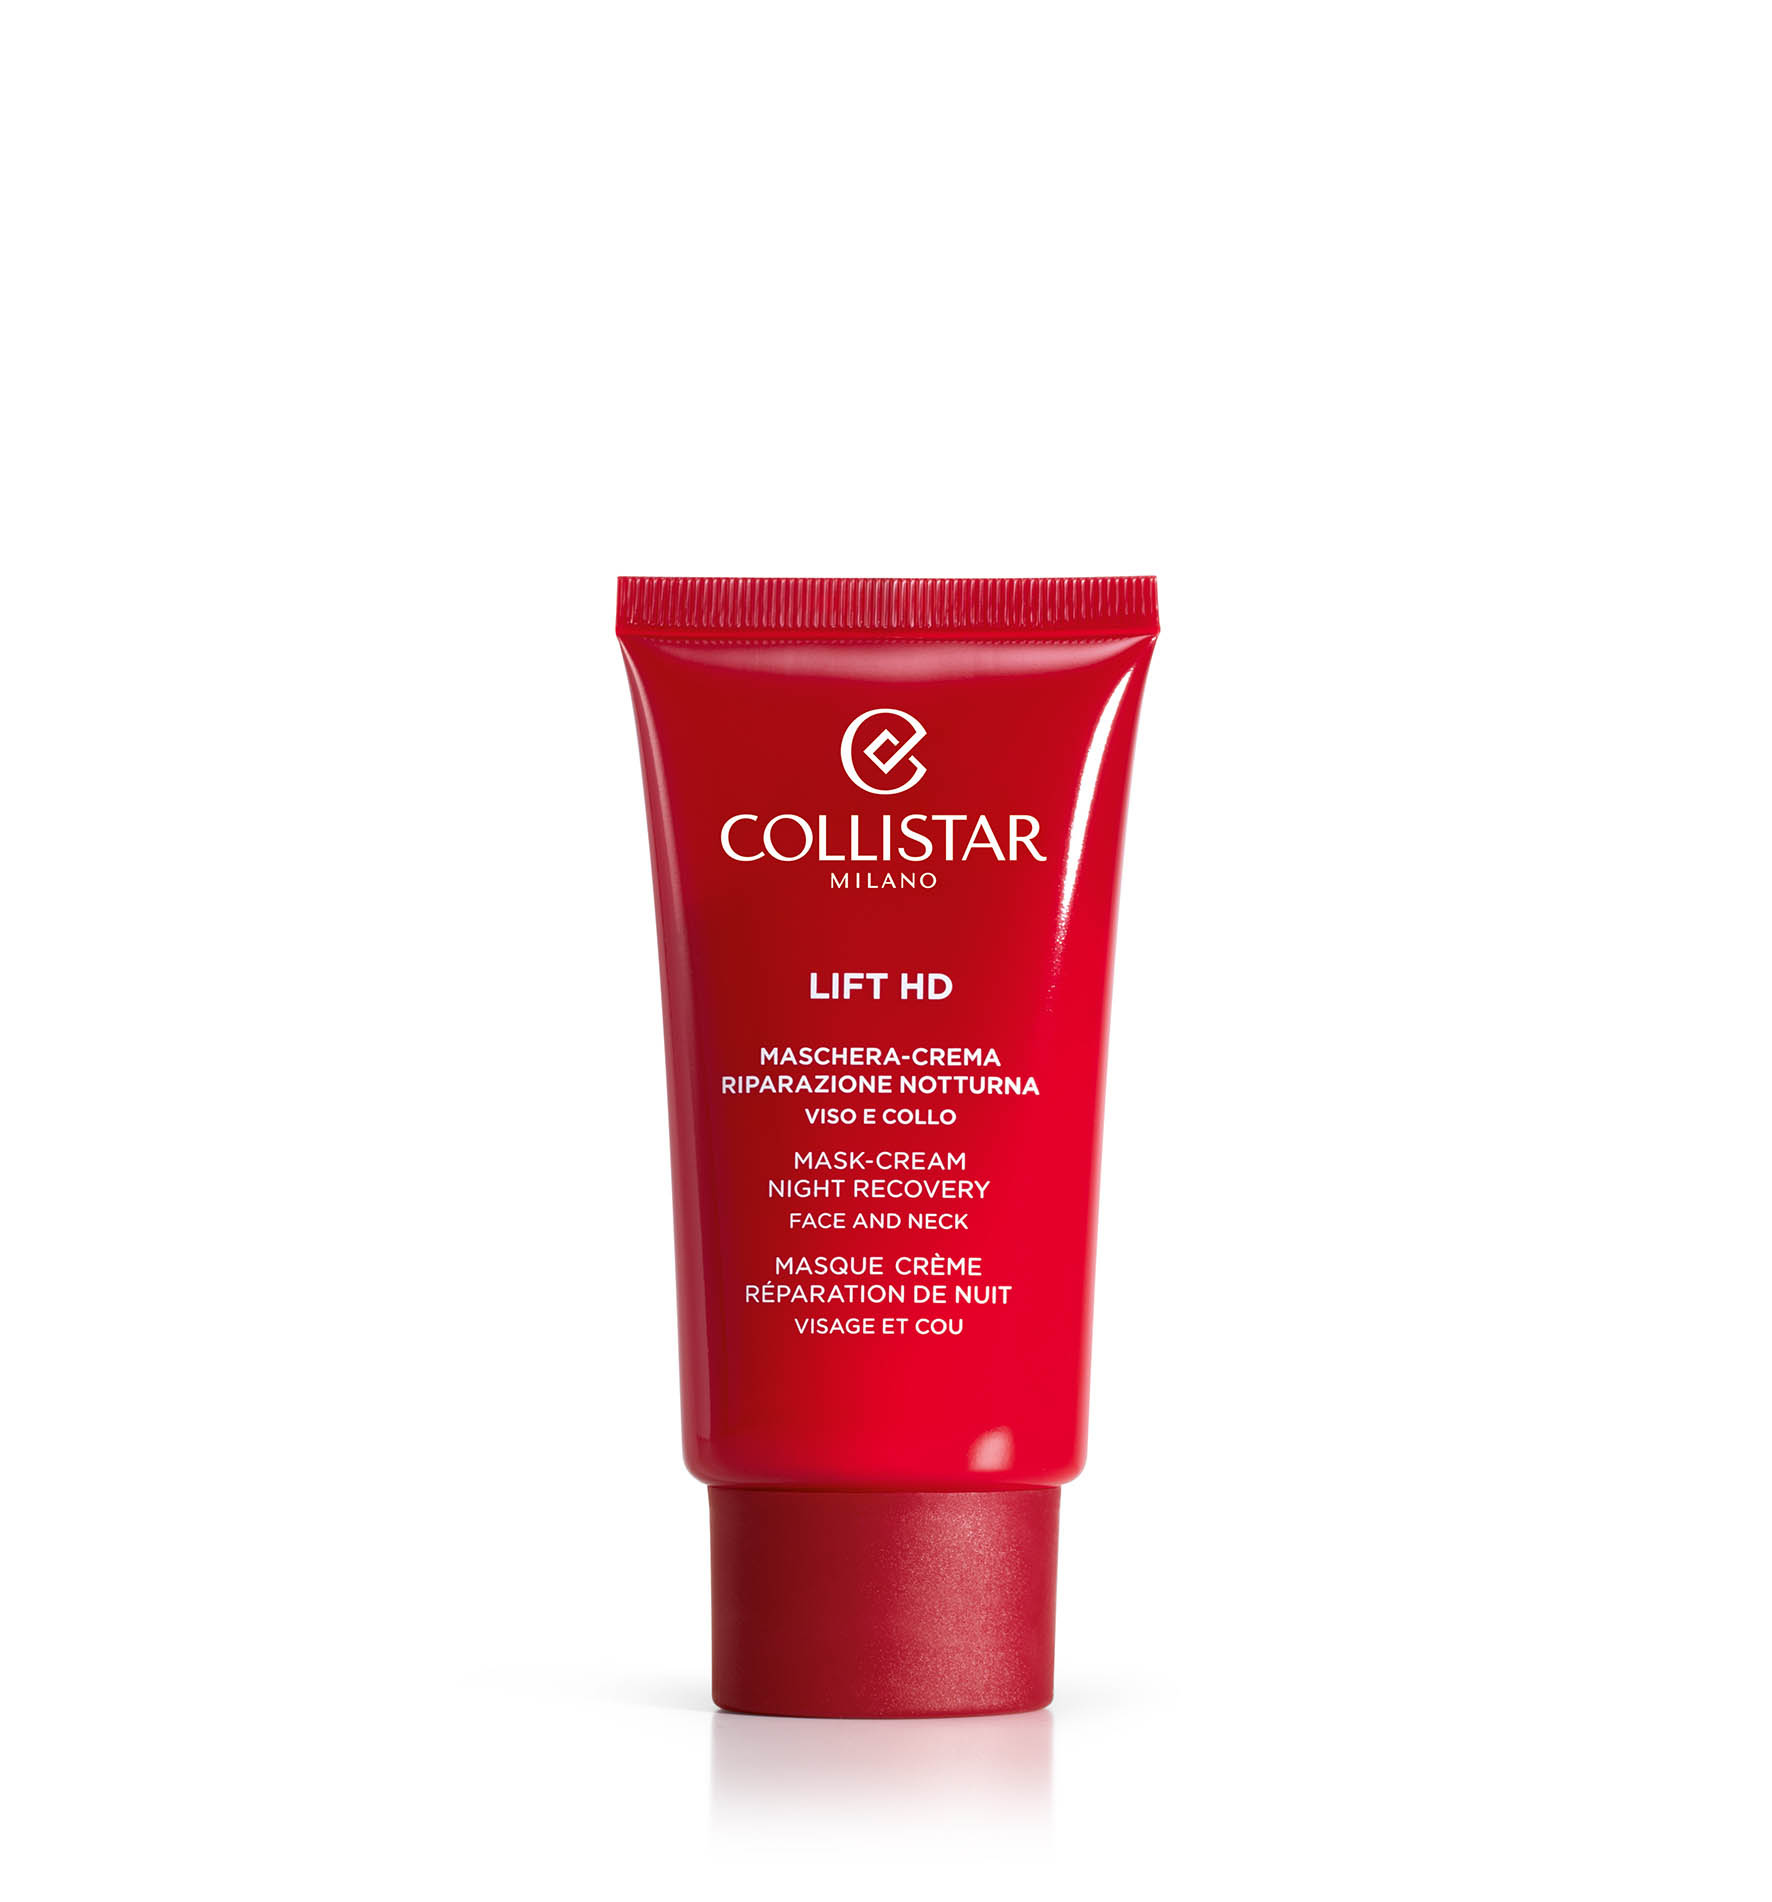 MASK-CREAM NIGHT RECOVERY FACE AND NECK - Droge huid | Collistar - Shop Online Ufficiale